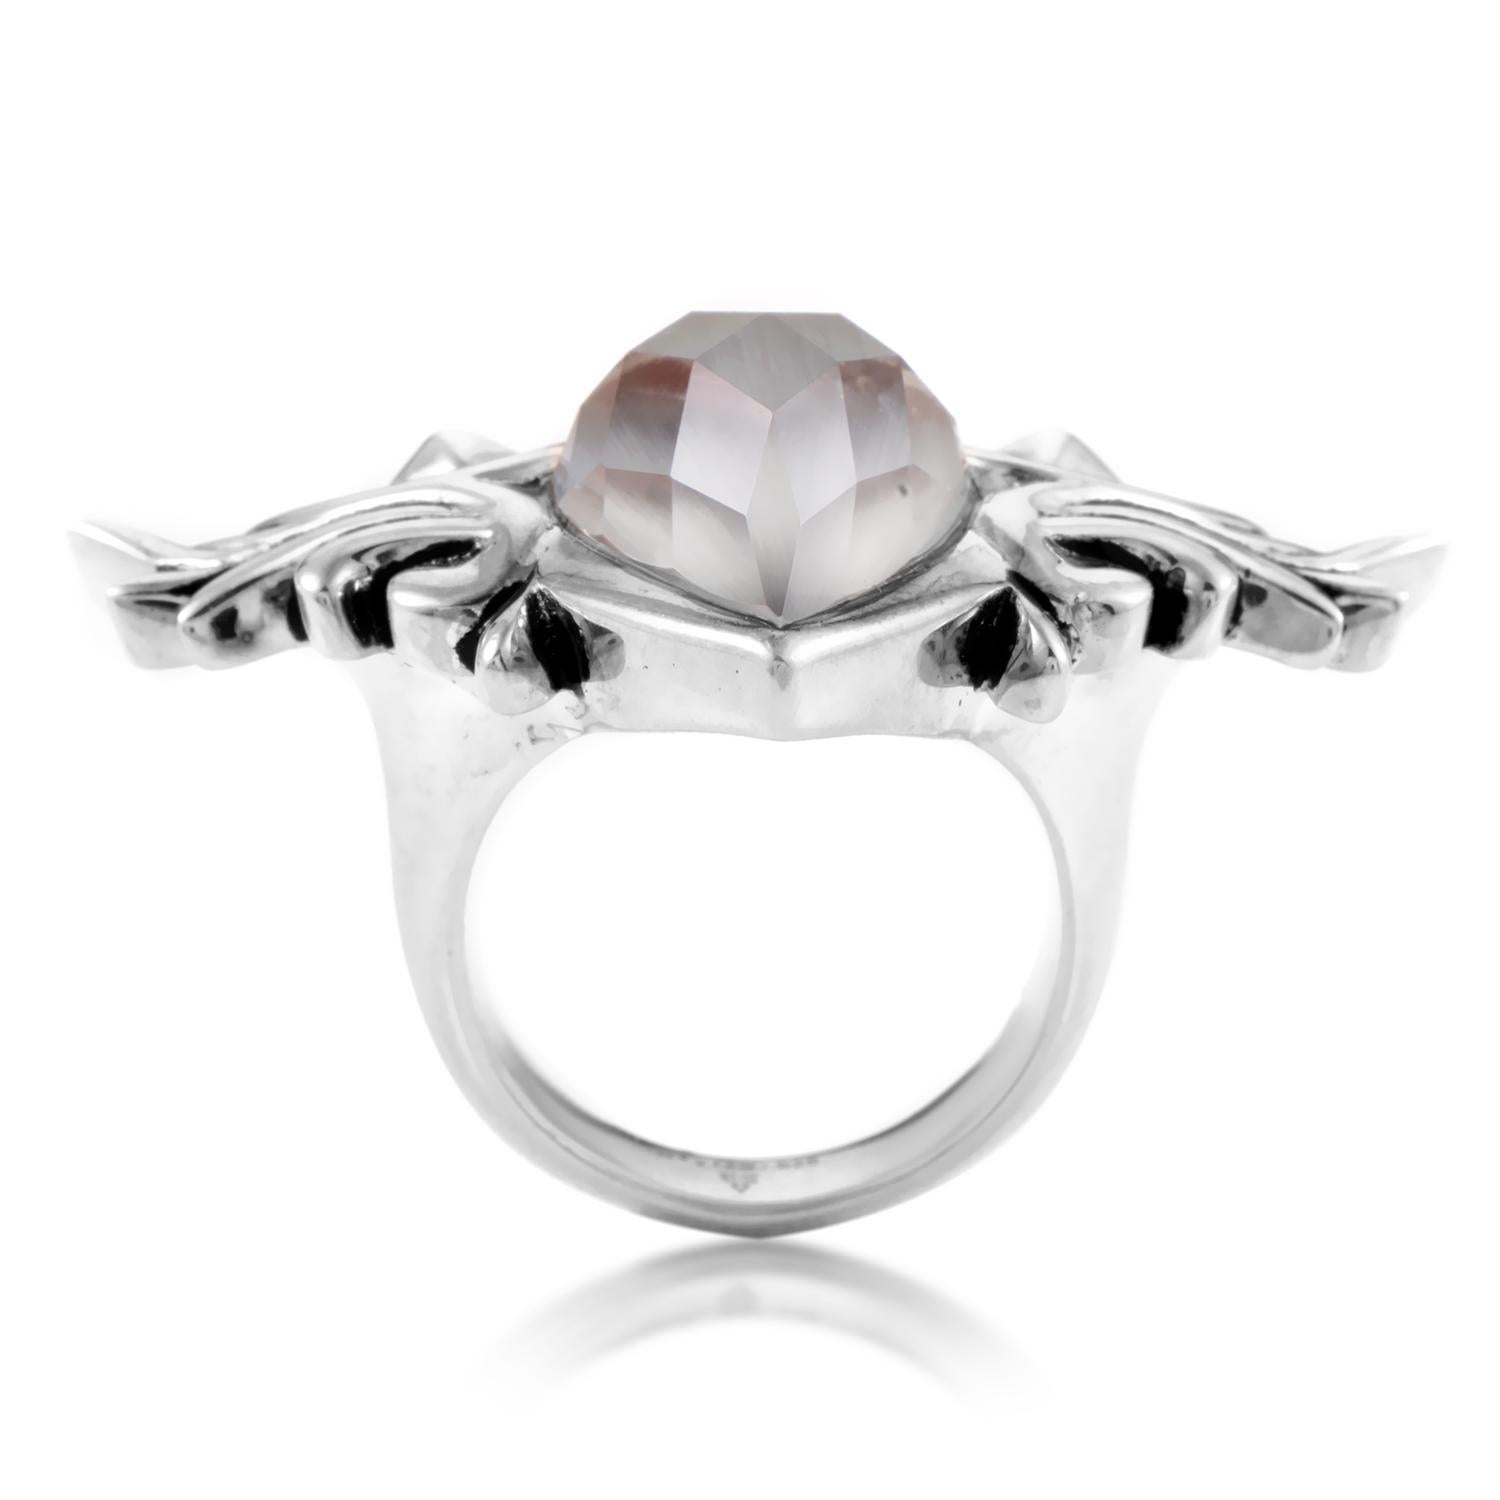 The elegance and daring edge of this ring is impressive in its heraldry to Stephen Webster. The pear cut, multifaceted stone gray cat's eye quartz is otherworldly in its own beauty. The sterling silver ring boasts elaborate detail on either side of